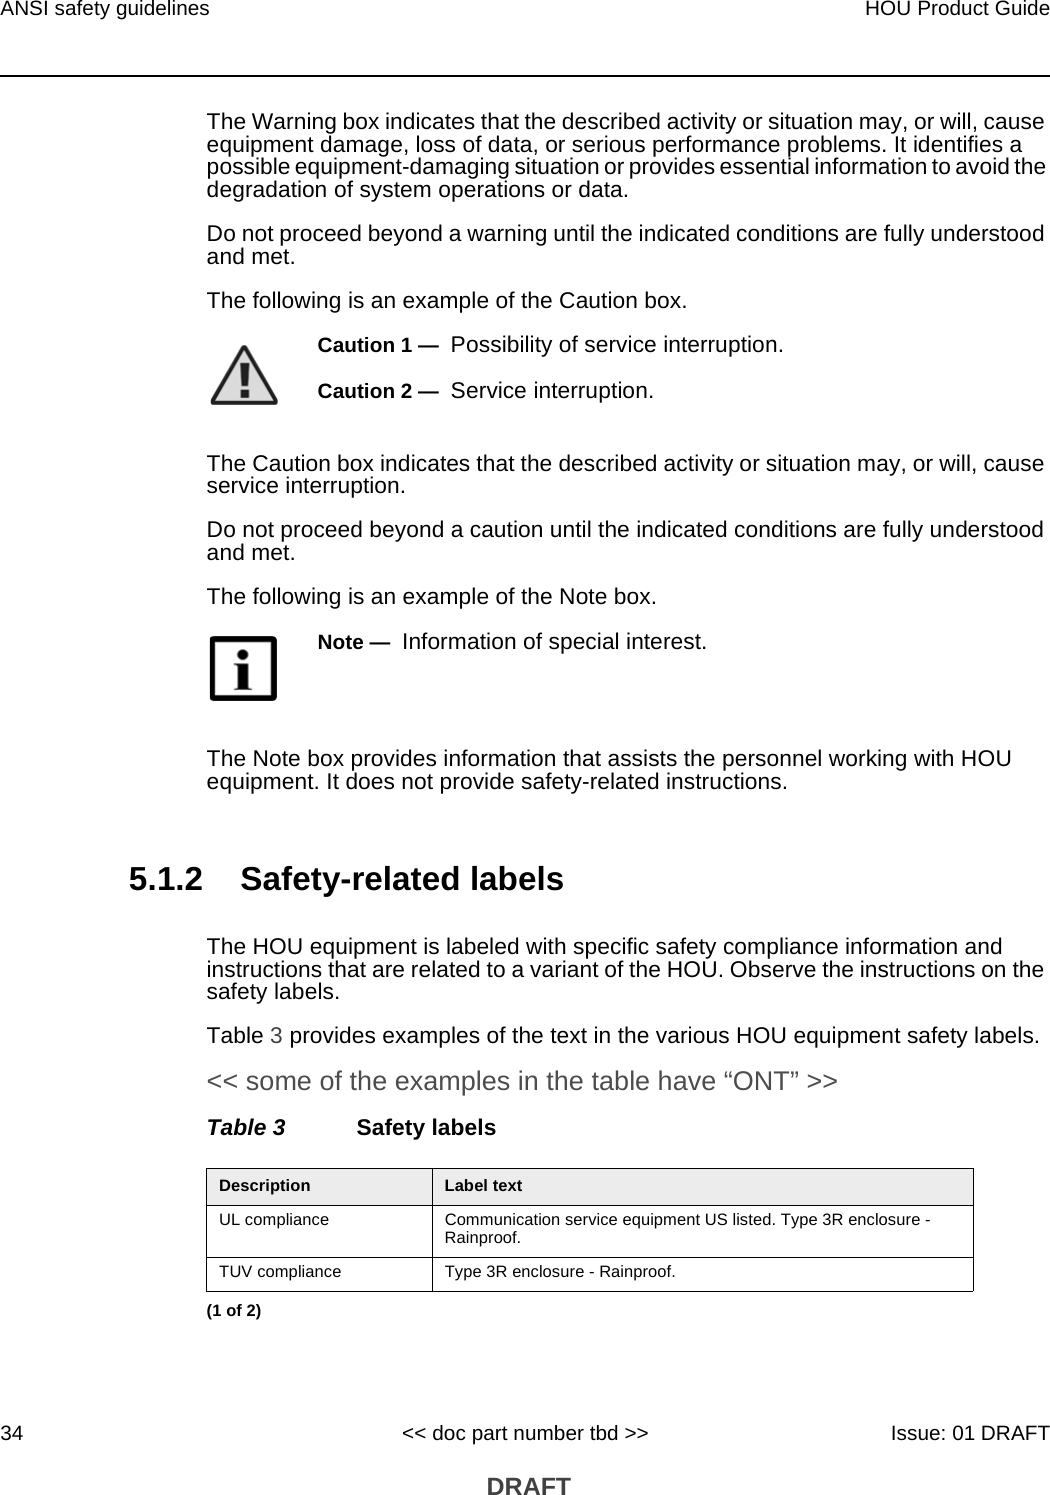 ANSI safety guidelines34HOU Product Guide&lt;&lt; doc part number tbd &gt;&gt; Issue: 01 DRAFT DRAFTThe Warning box indicates that the described activity or situation may, or will, cause equipment damage, loss of data, or serious performance problems. It identifies a possible equipment-damaging situation or provides essential information to avoid the degradation of system operations or data.Do not proceed beyond a warning until the indicated conditions are fully understood and met.The following is an example of the Caution box.The Caution box indicates that the described activity or situation may, or will, cause service interruption.Do not proceed beyond a caution until the indicated conditions are fully understood and met.The following is an example of the Note box.The Note box provides information that assists the personnel working with HOU equipment. It does not provide safety-related instructions.5.1.2 Safety-related labelsThe HOU equipment is labeled with specific safety compliance information and instructions that are related to a variant of the HOU. Observe the instructions on the safety labels.Table 3 provides examples of the text in the various HOU equipment safety labels. &lt;&lt; some of the examples in the table have “ONT” &gt;&gt;Table 3 Safety labelsCaution 1 —  Possibility of service interruption.Caution 2 —  Service interruption.Note —  Information of special interest.Description Label textUL compliance Communication service equipment US listed. Type 3R enclosure - Rainproof.TUV compliance Type 3R enclosure - Rainproof.(1 of 2)